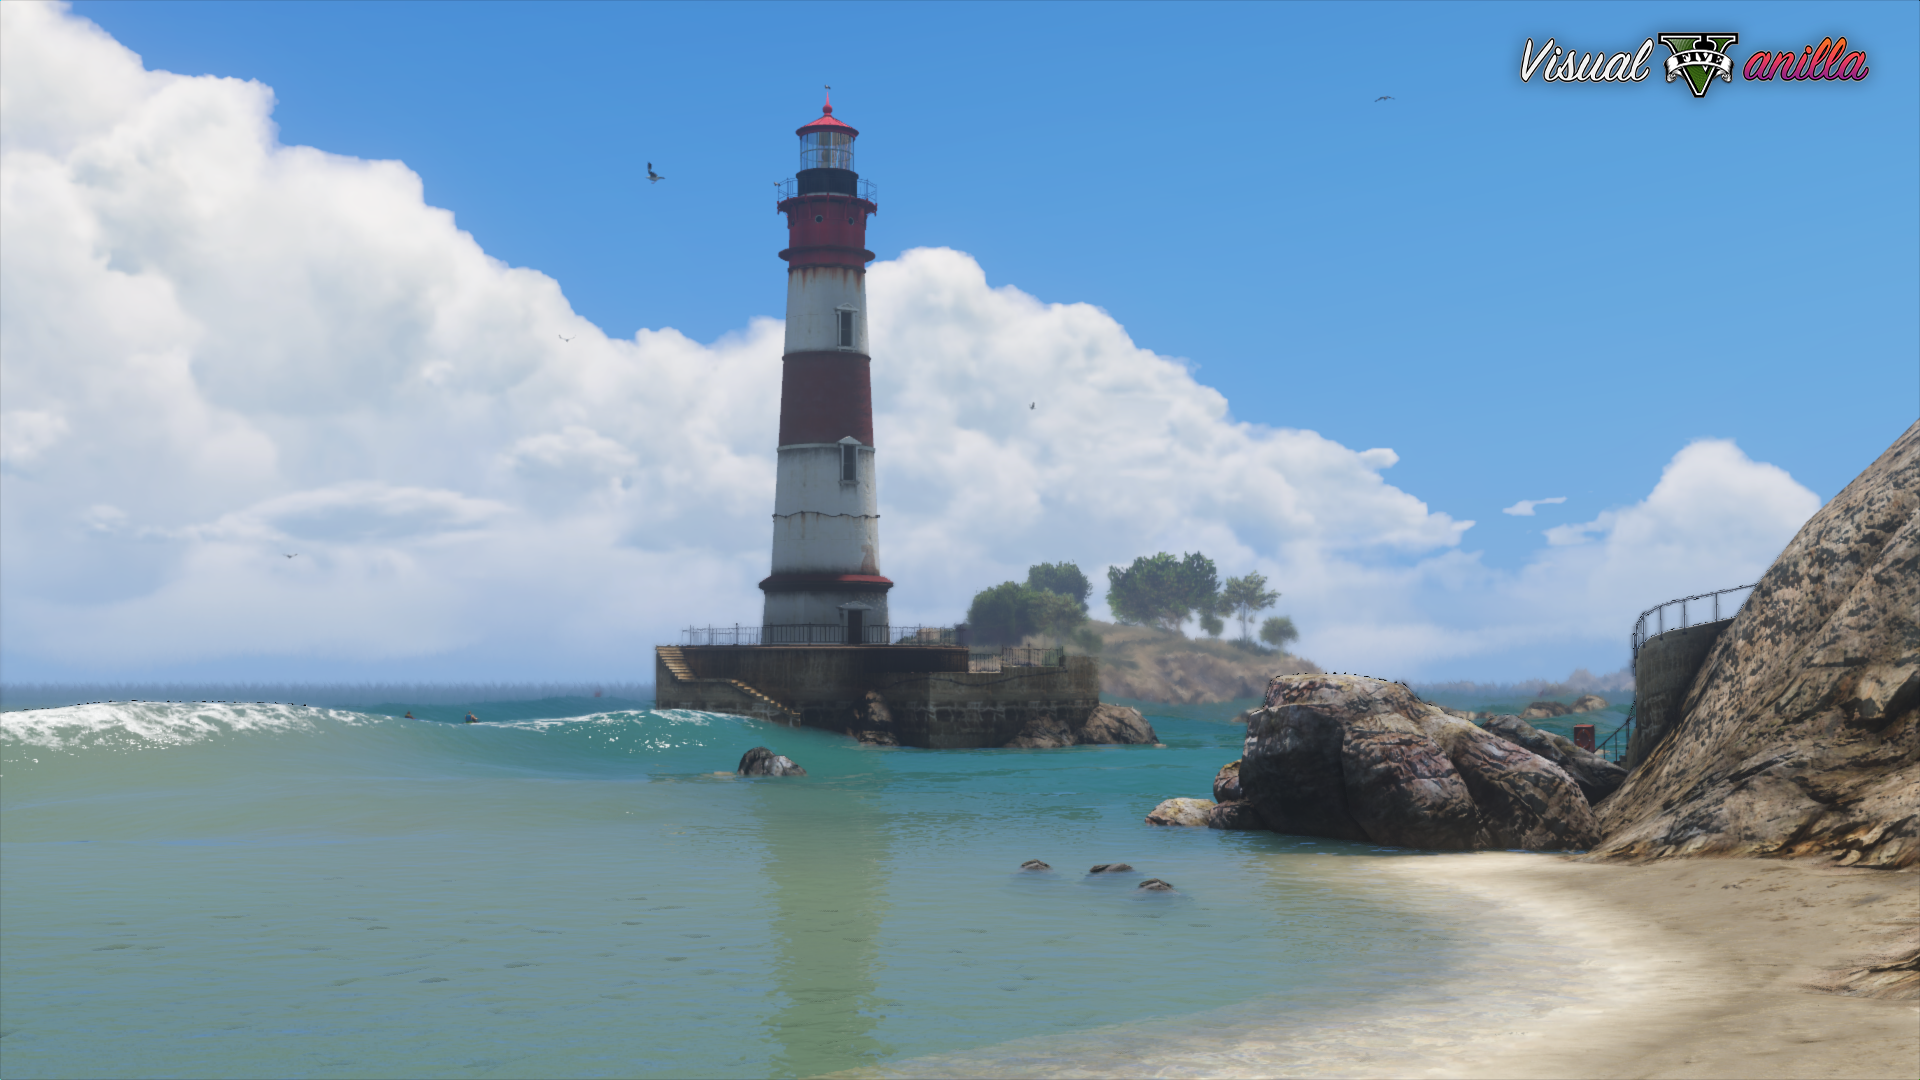 Awesome mod gives GTA V a massive graphics overhaul, makes it look